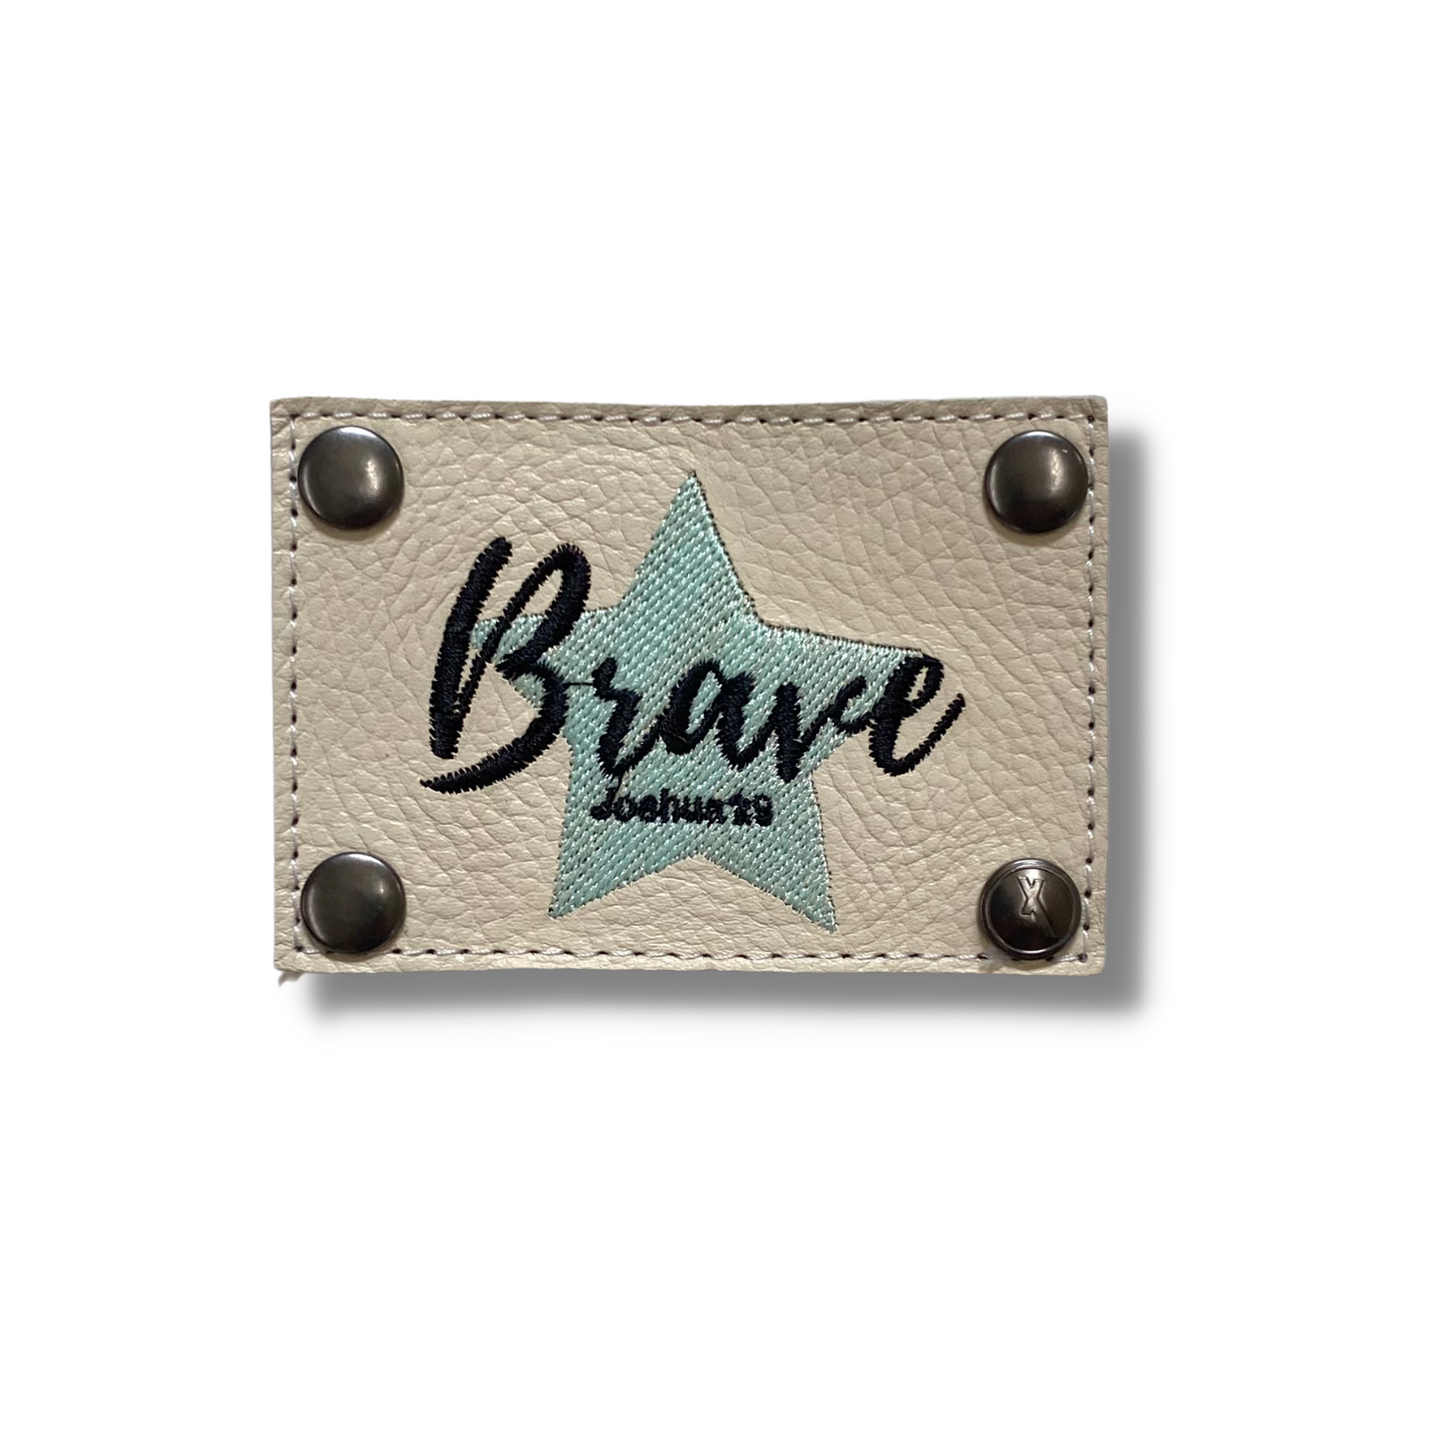 The Brave Patch